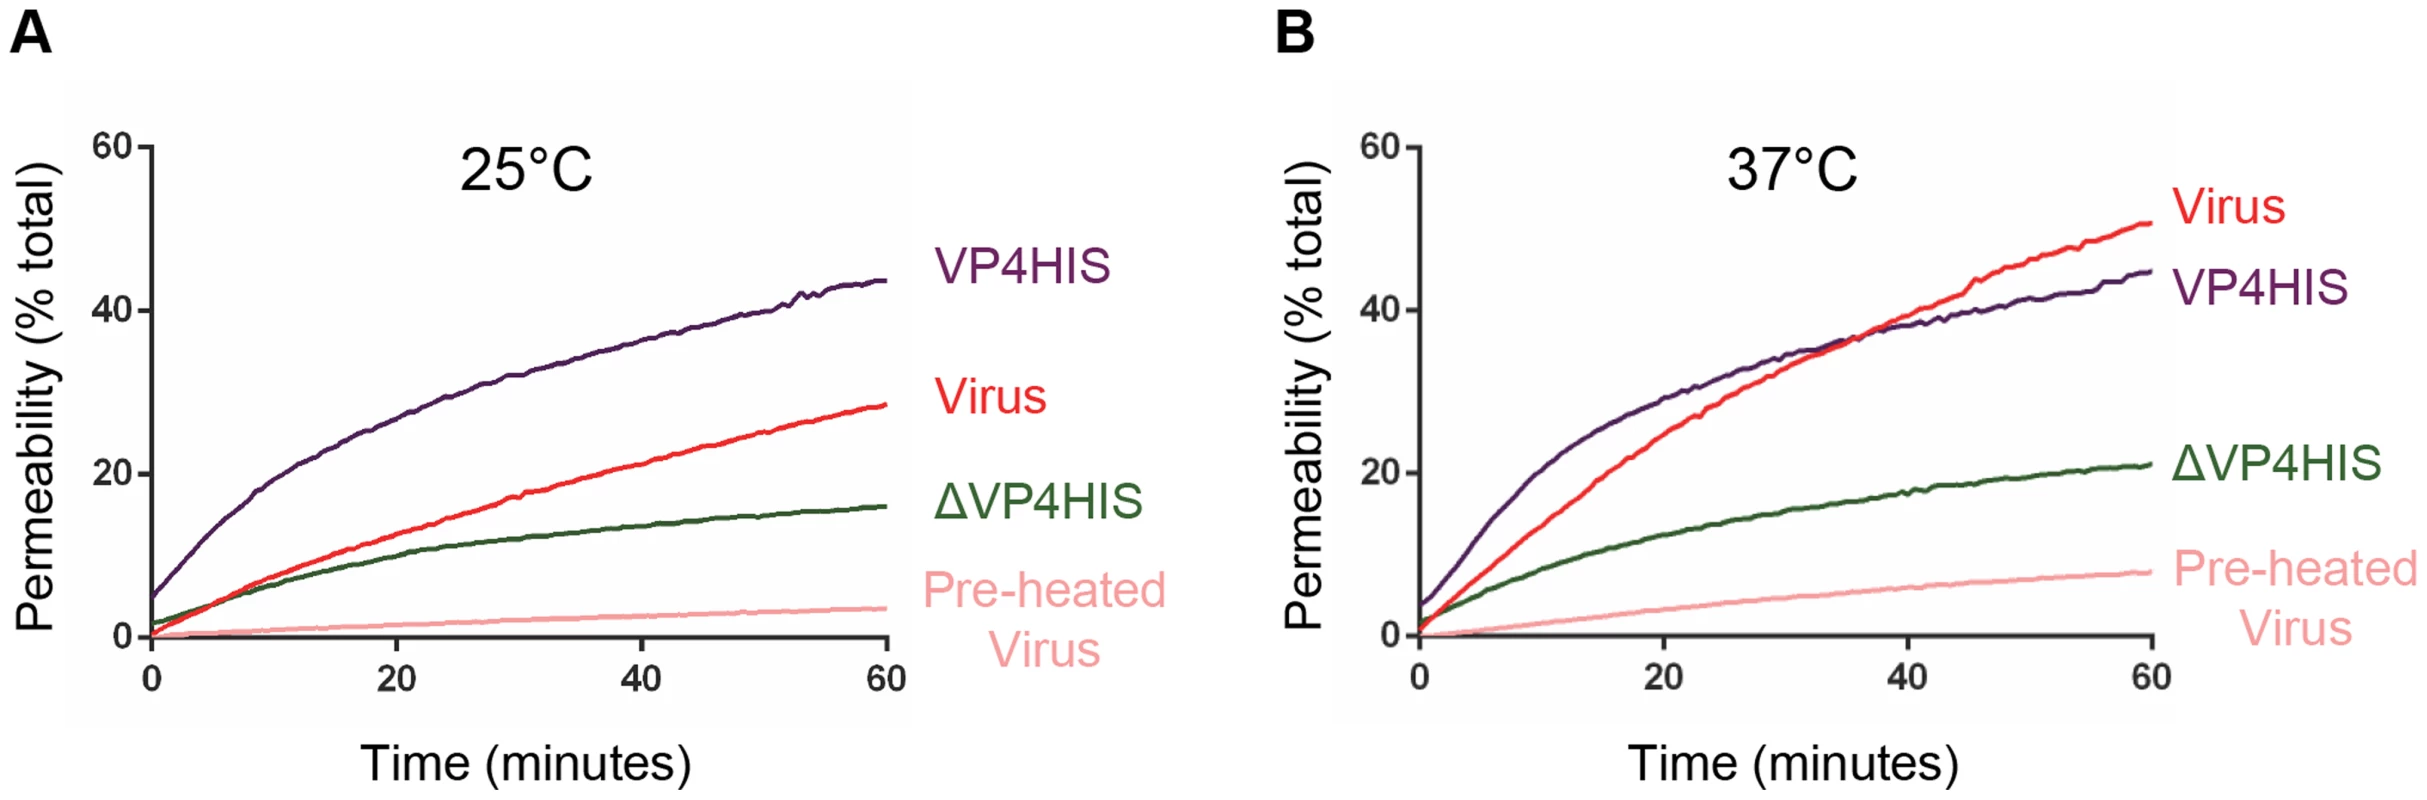 VP4-induced permeability is comparable to that of virus.